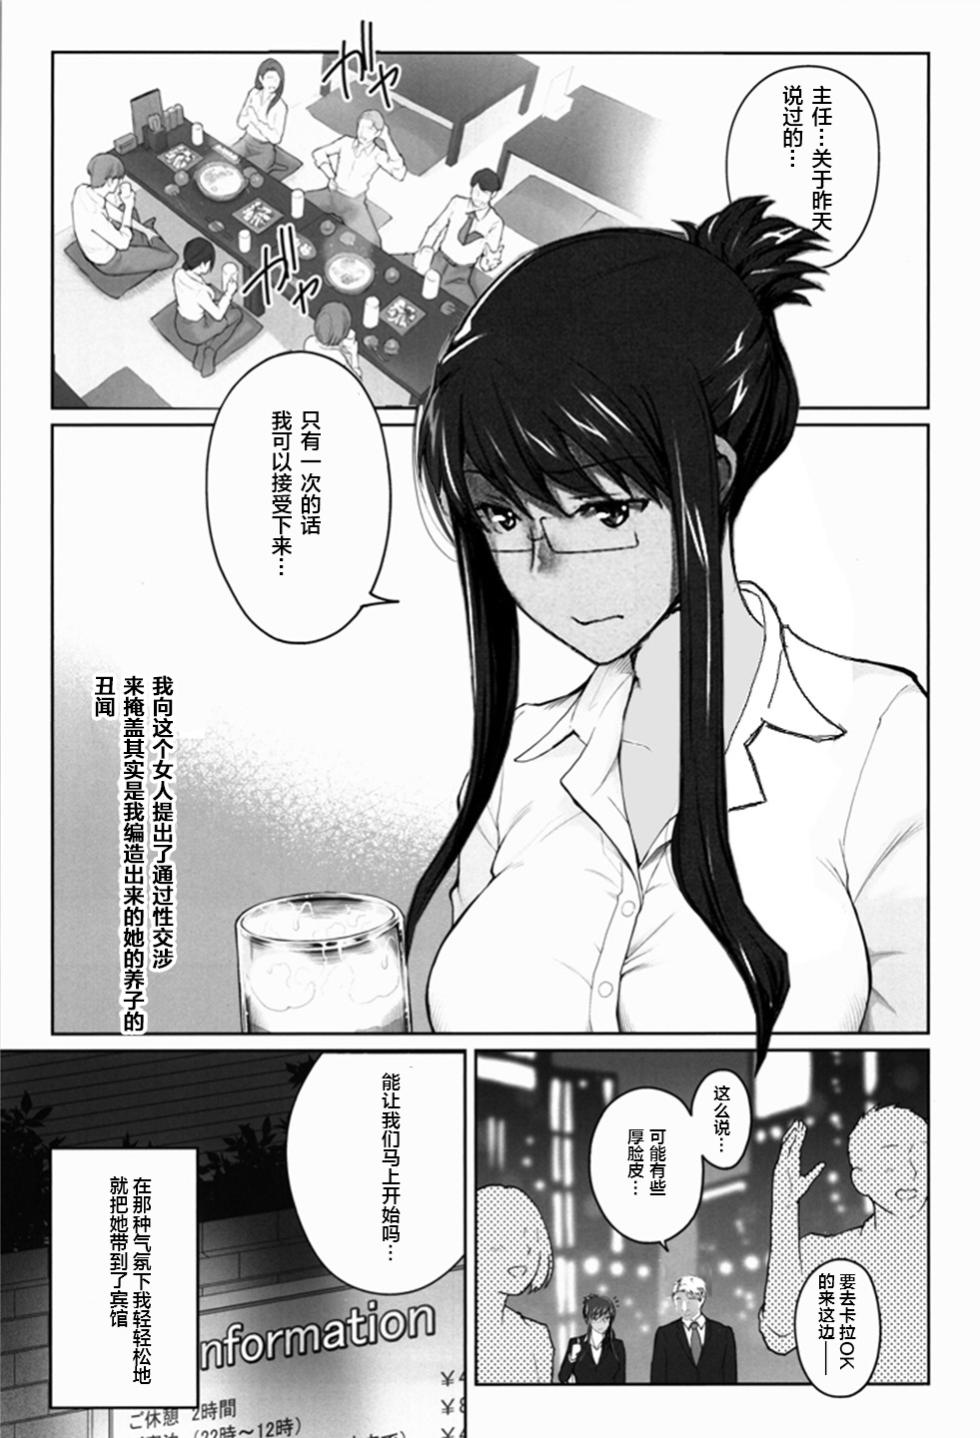 Sakiko-san in delusion Vol.11 ~Sakiko-san's circumstance of friends with benefits Route2~ (collage) [Chinese] [便宜汉化组] - Page 2